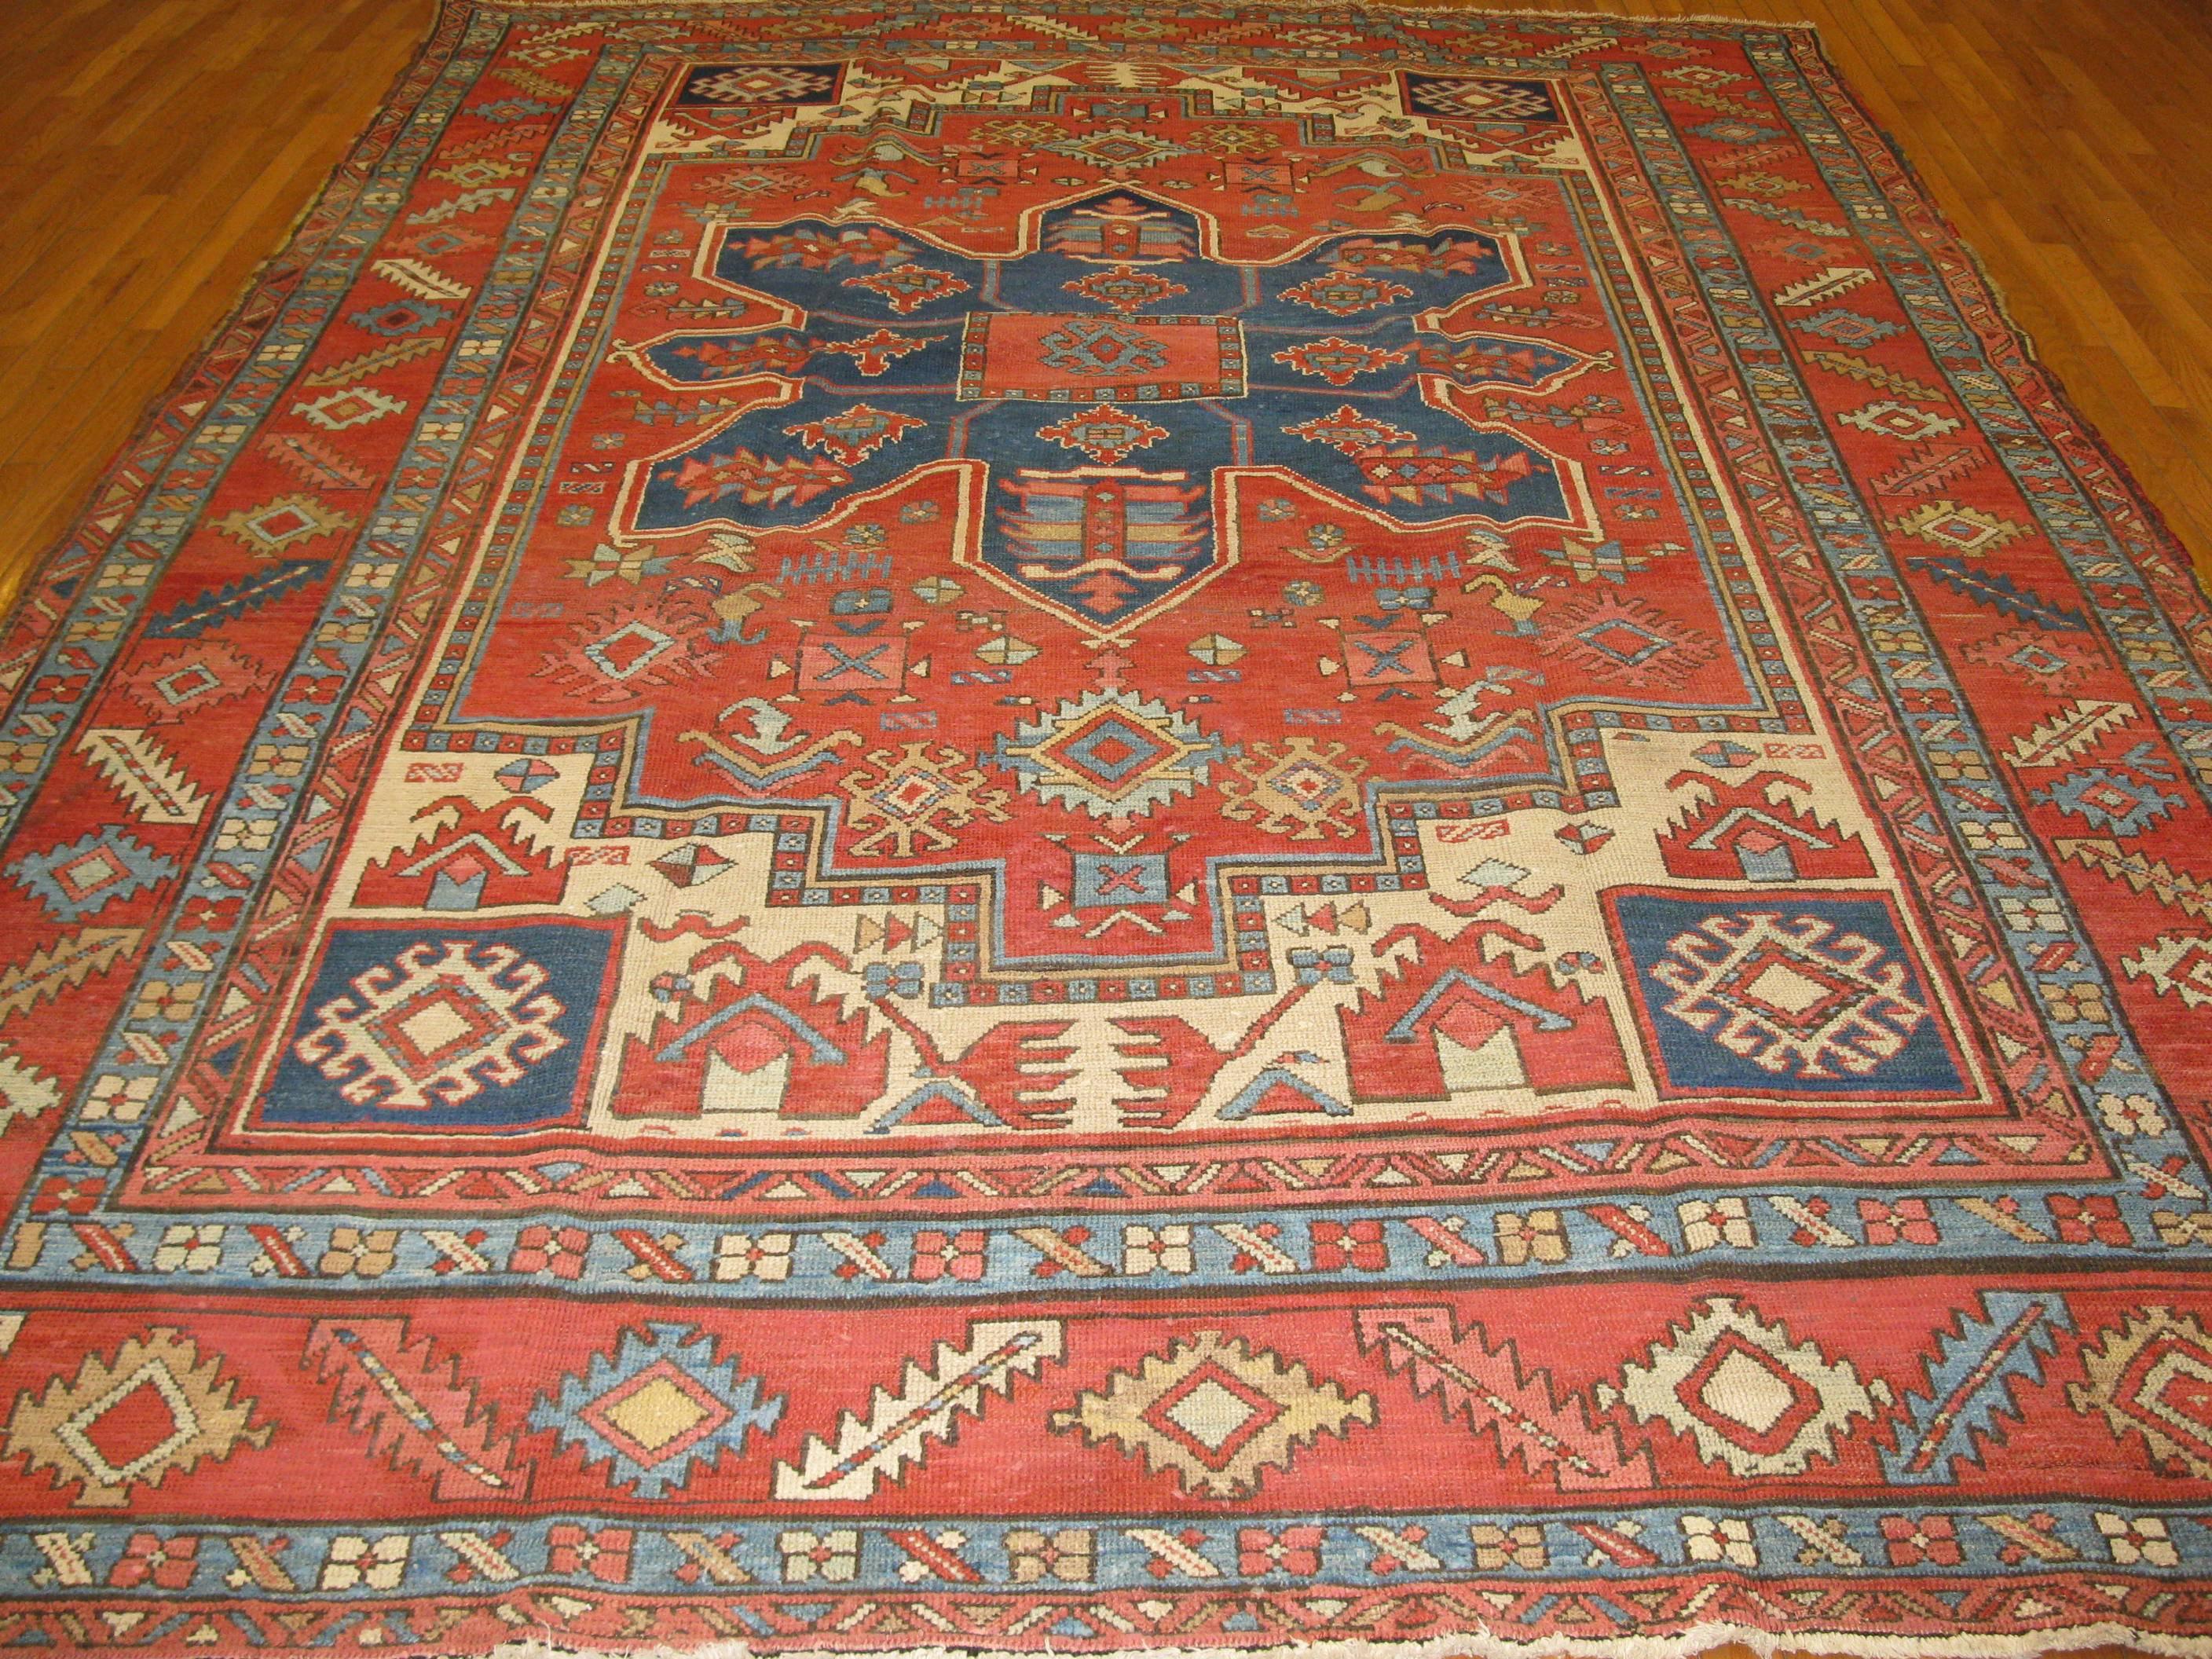 This is a room size simple pattern traditional tribal looking Persian Serapi rug.
It measures 9' x 11' 5'' with rich navy and melon red colors fit to enhance the look of any room.